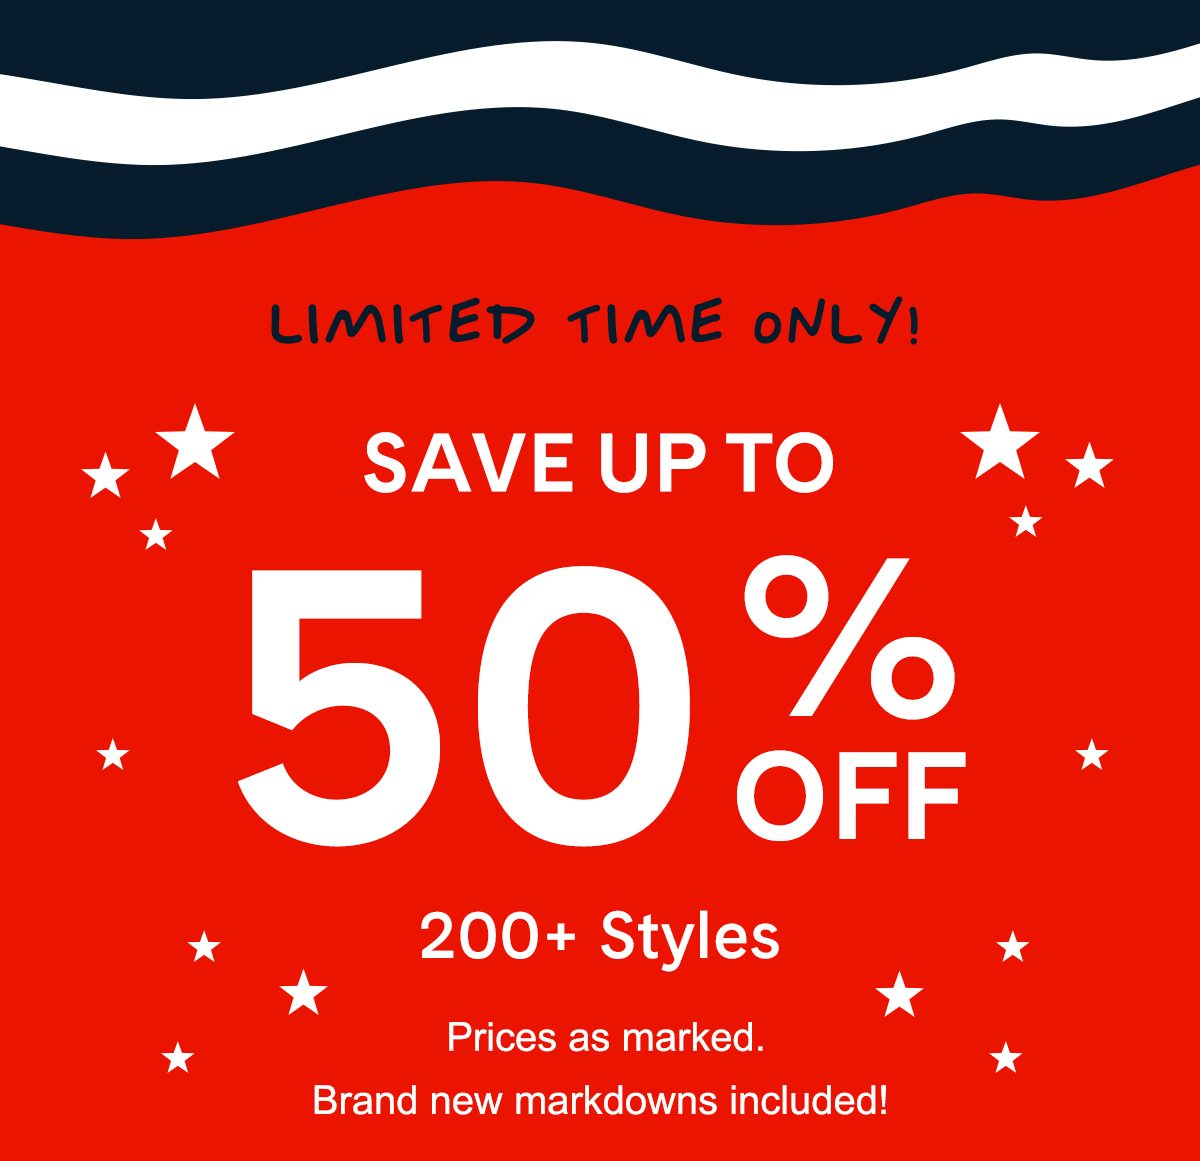 Up To 30% off all styles